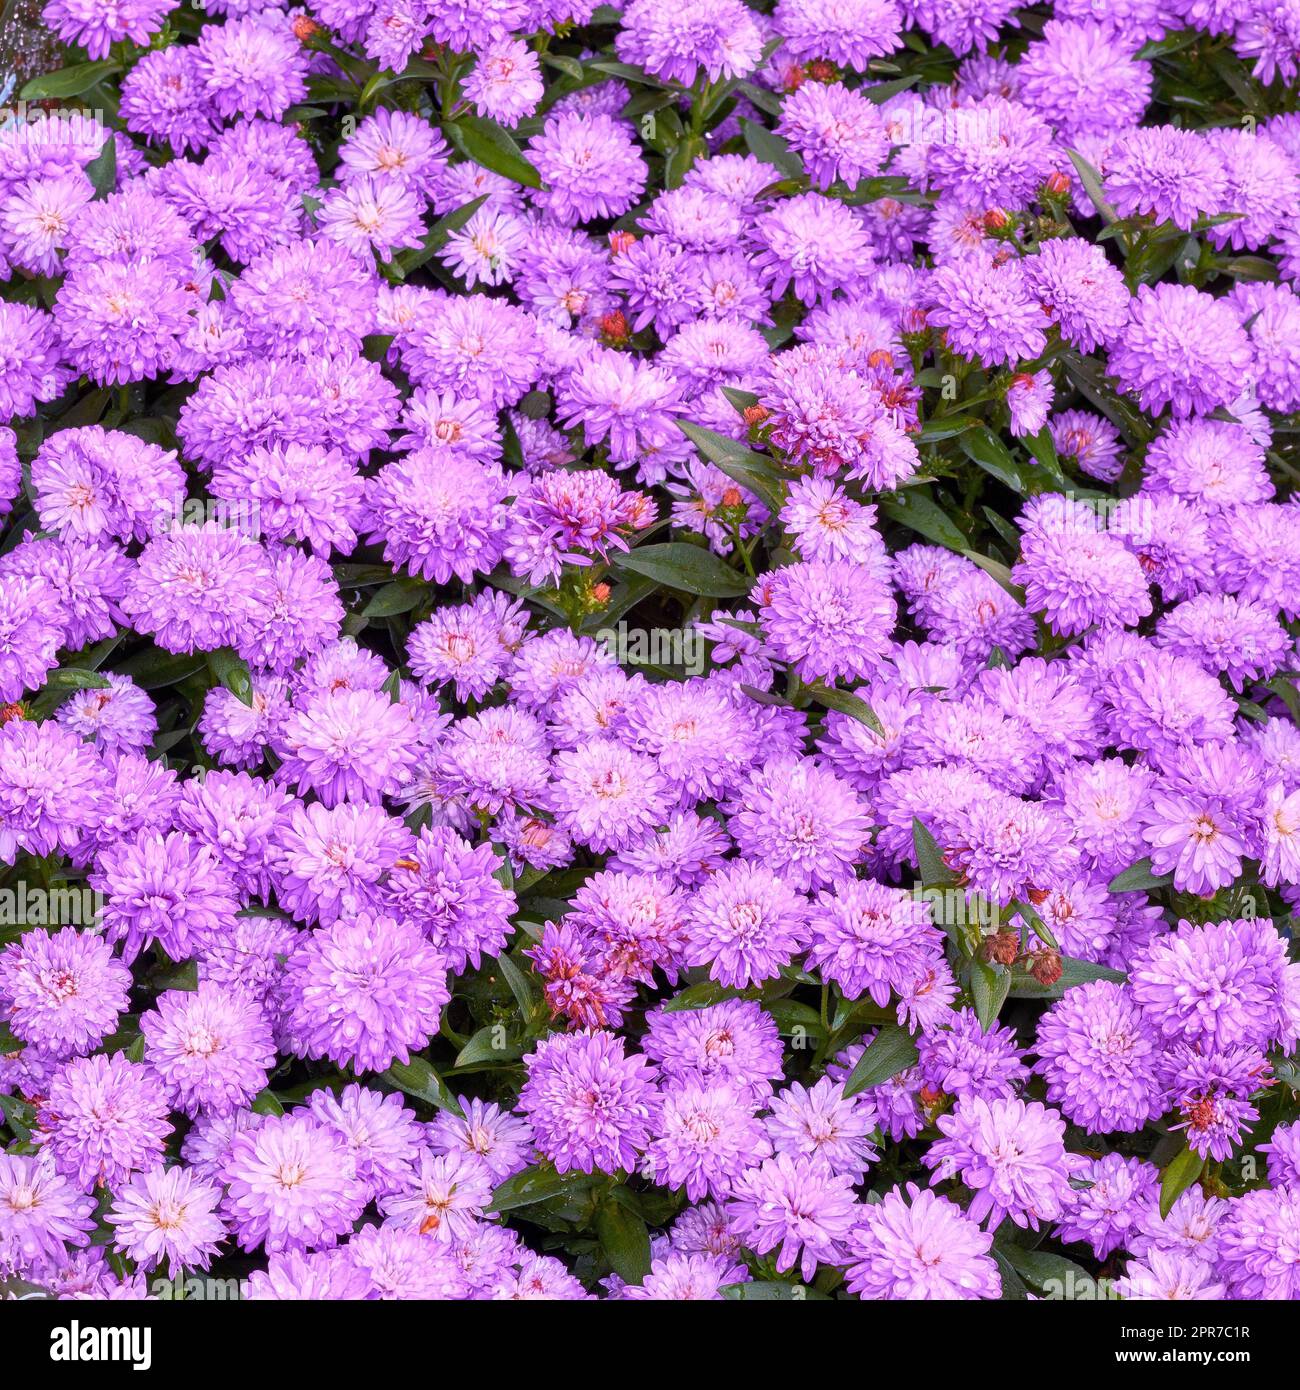 Beautiful purple aster flowers growing in botanical garden outdoors in nature from above. Bright and vibrant plants blossoming in a natural environment during spring season. Fresh floral blooms Stock Photo